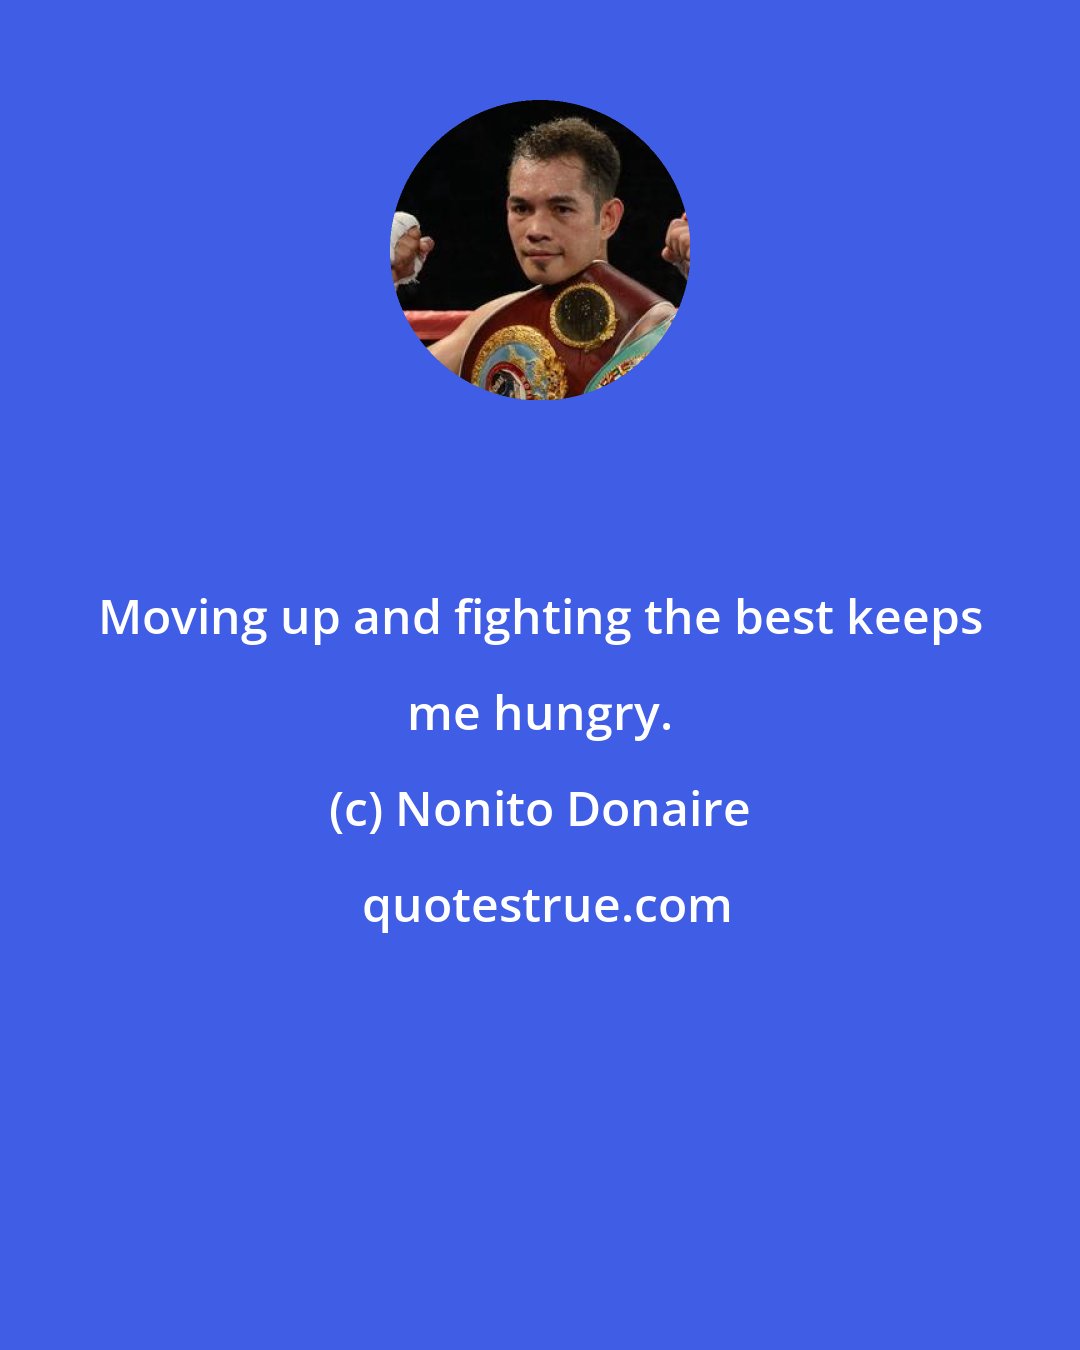 Nonito Donaire: Moving up and fighting the best keeps me hungry.